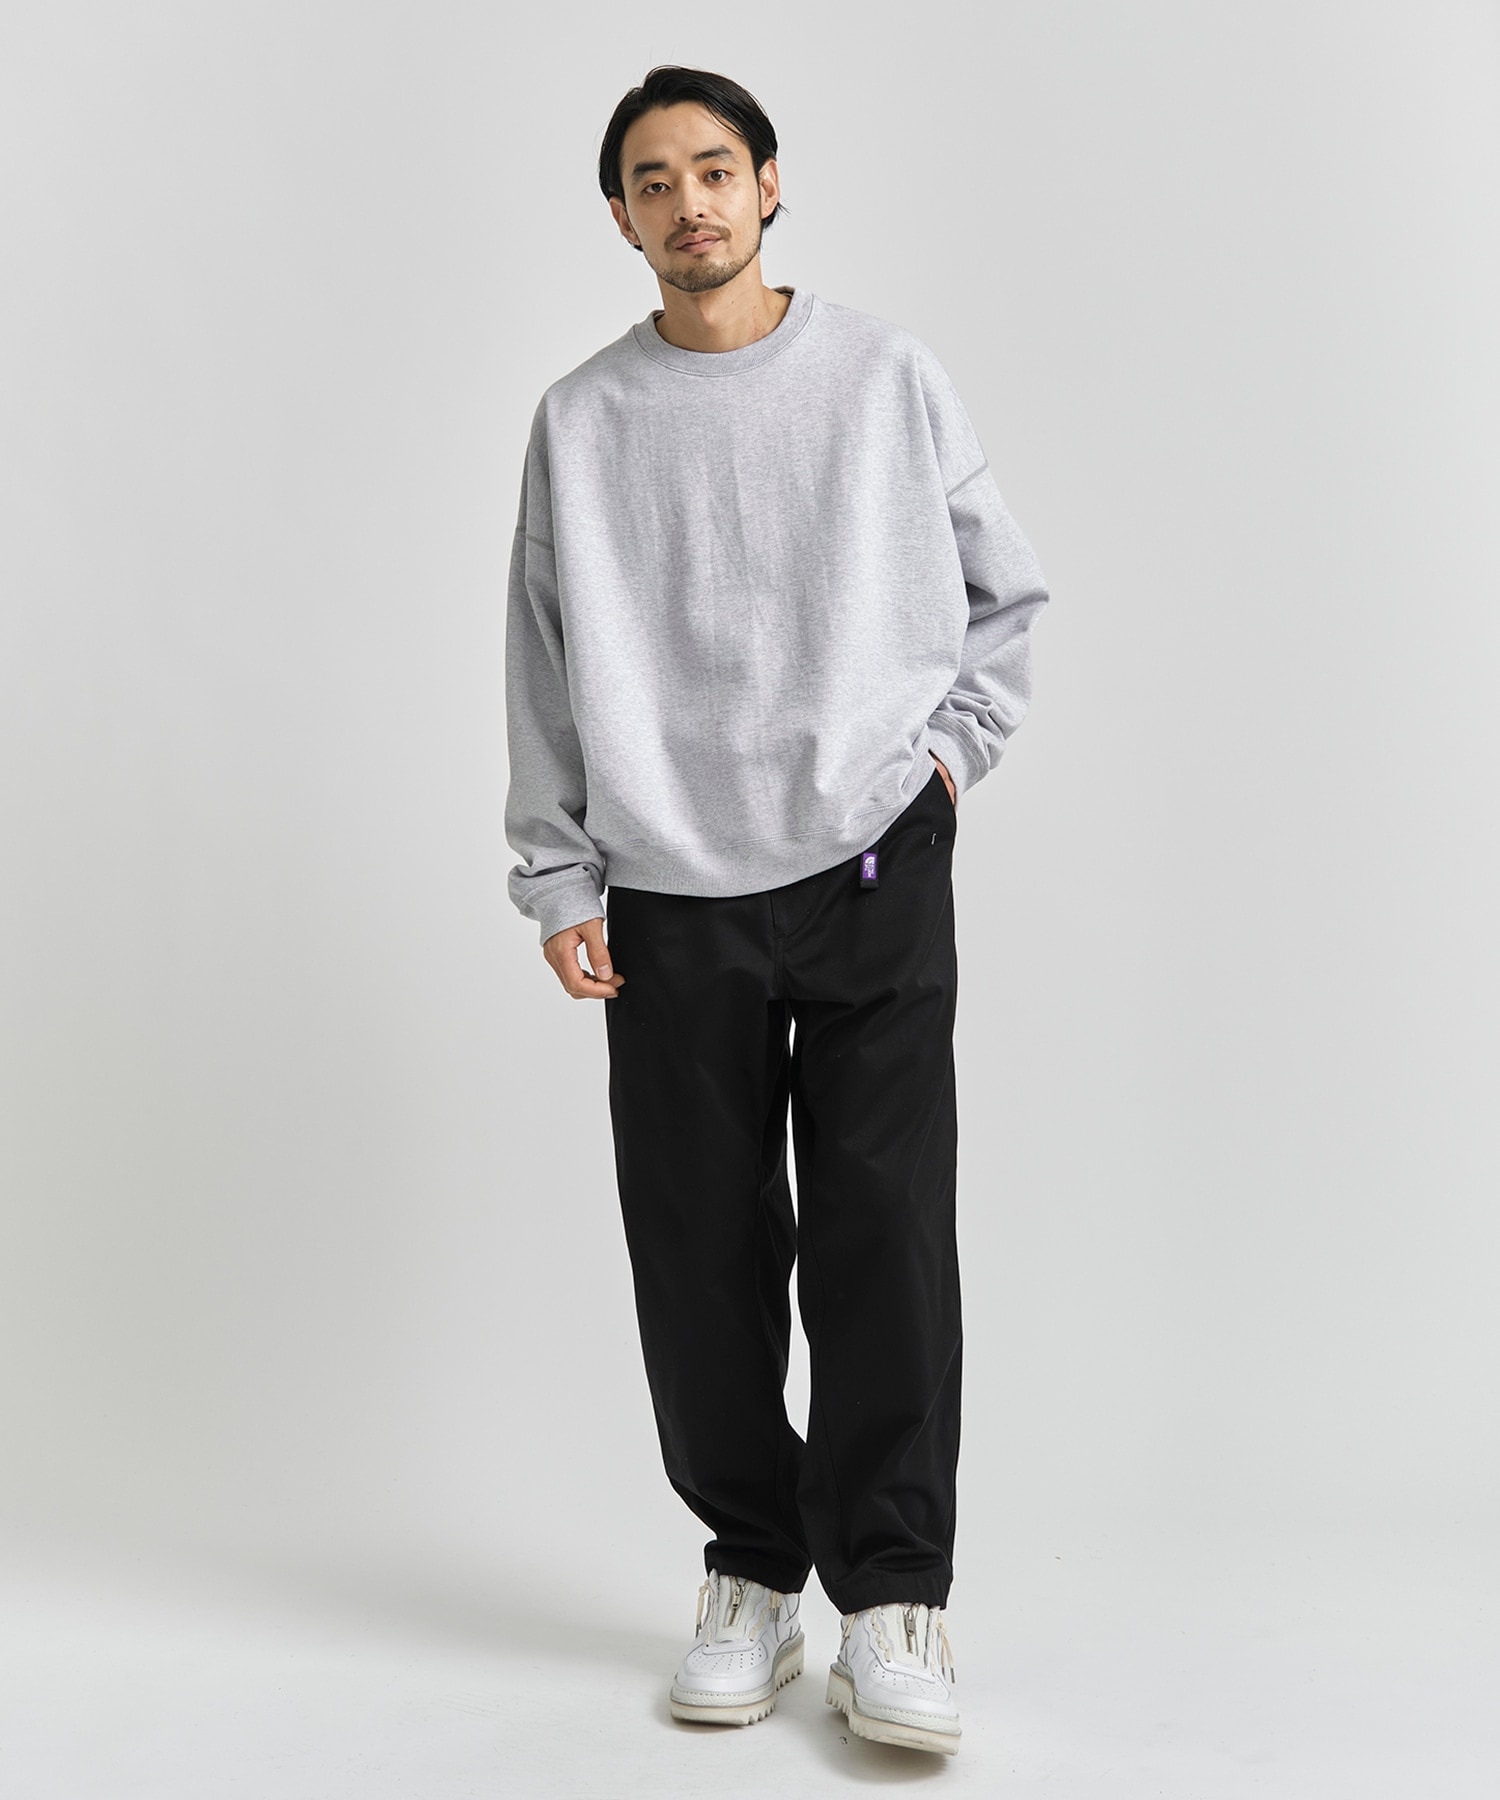 Chino Wide Tapered Field Pants | THE NORTH FACE PURPLE LABEL